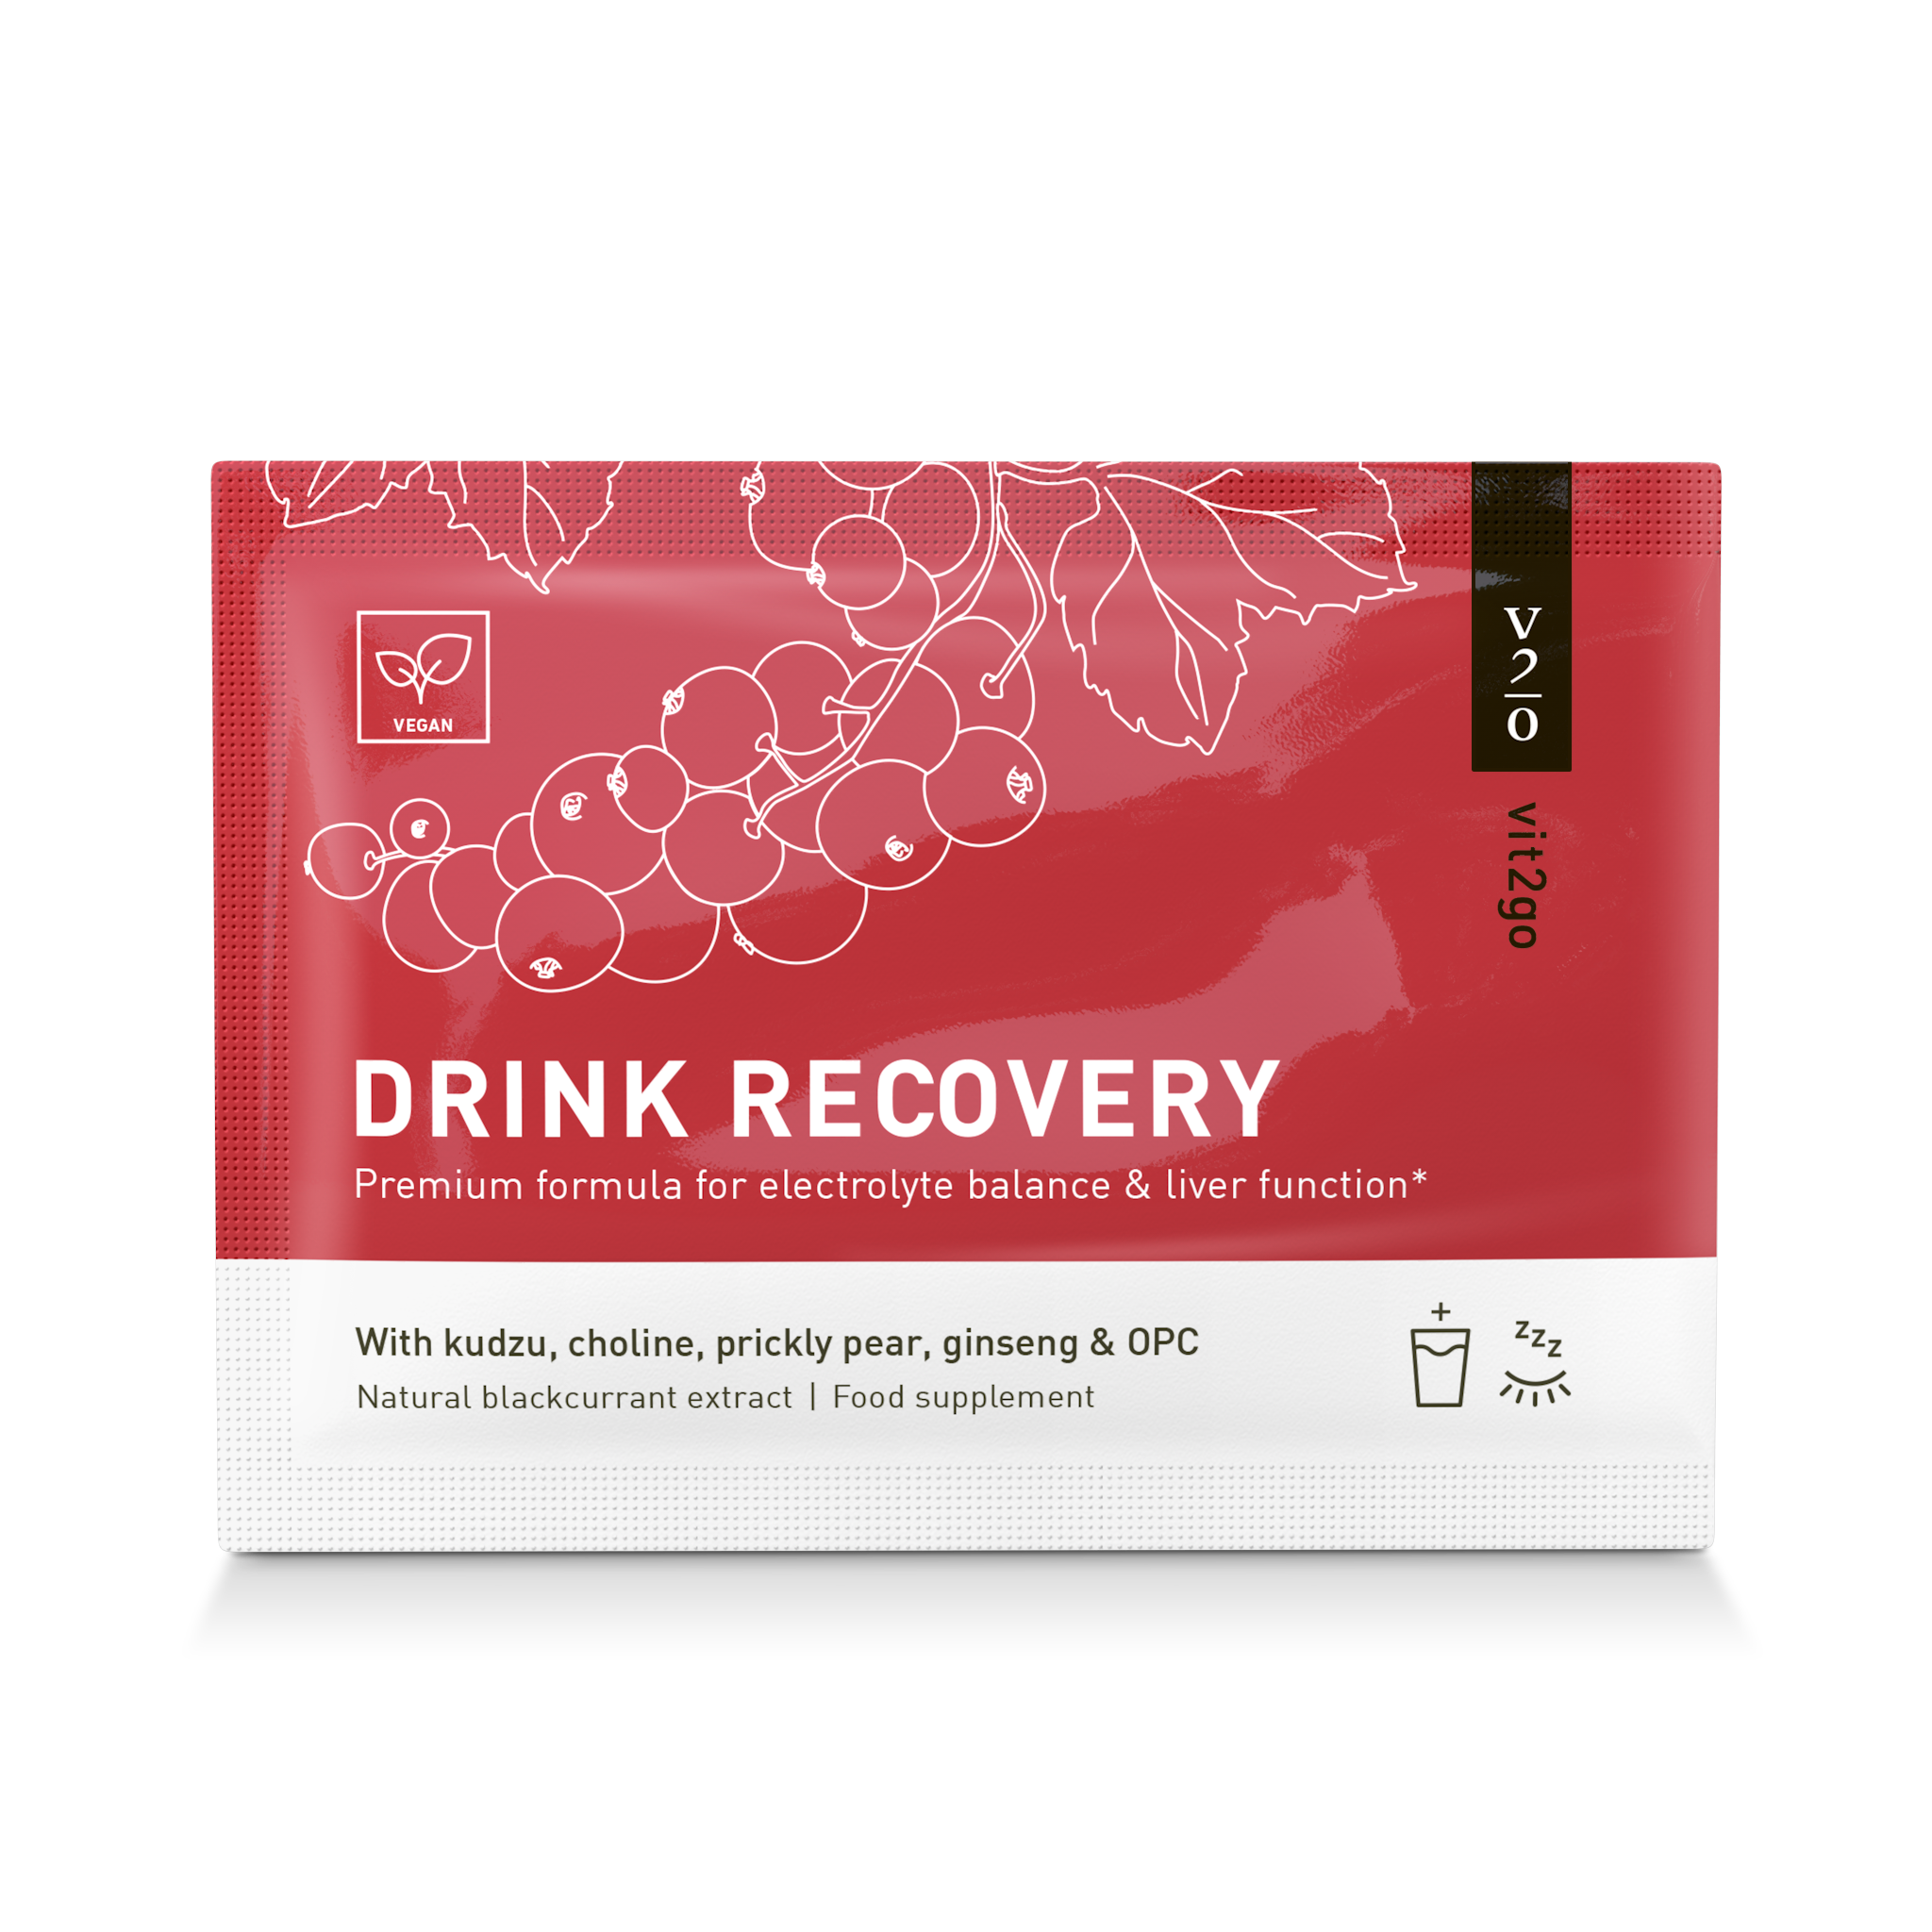 DRINK RECOVERY – PORTION UNIQUE